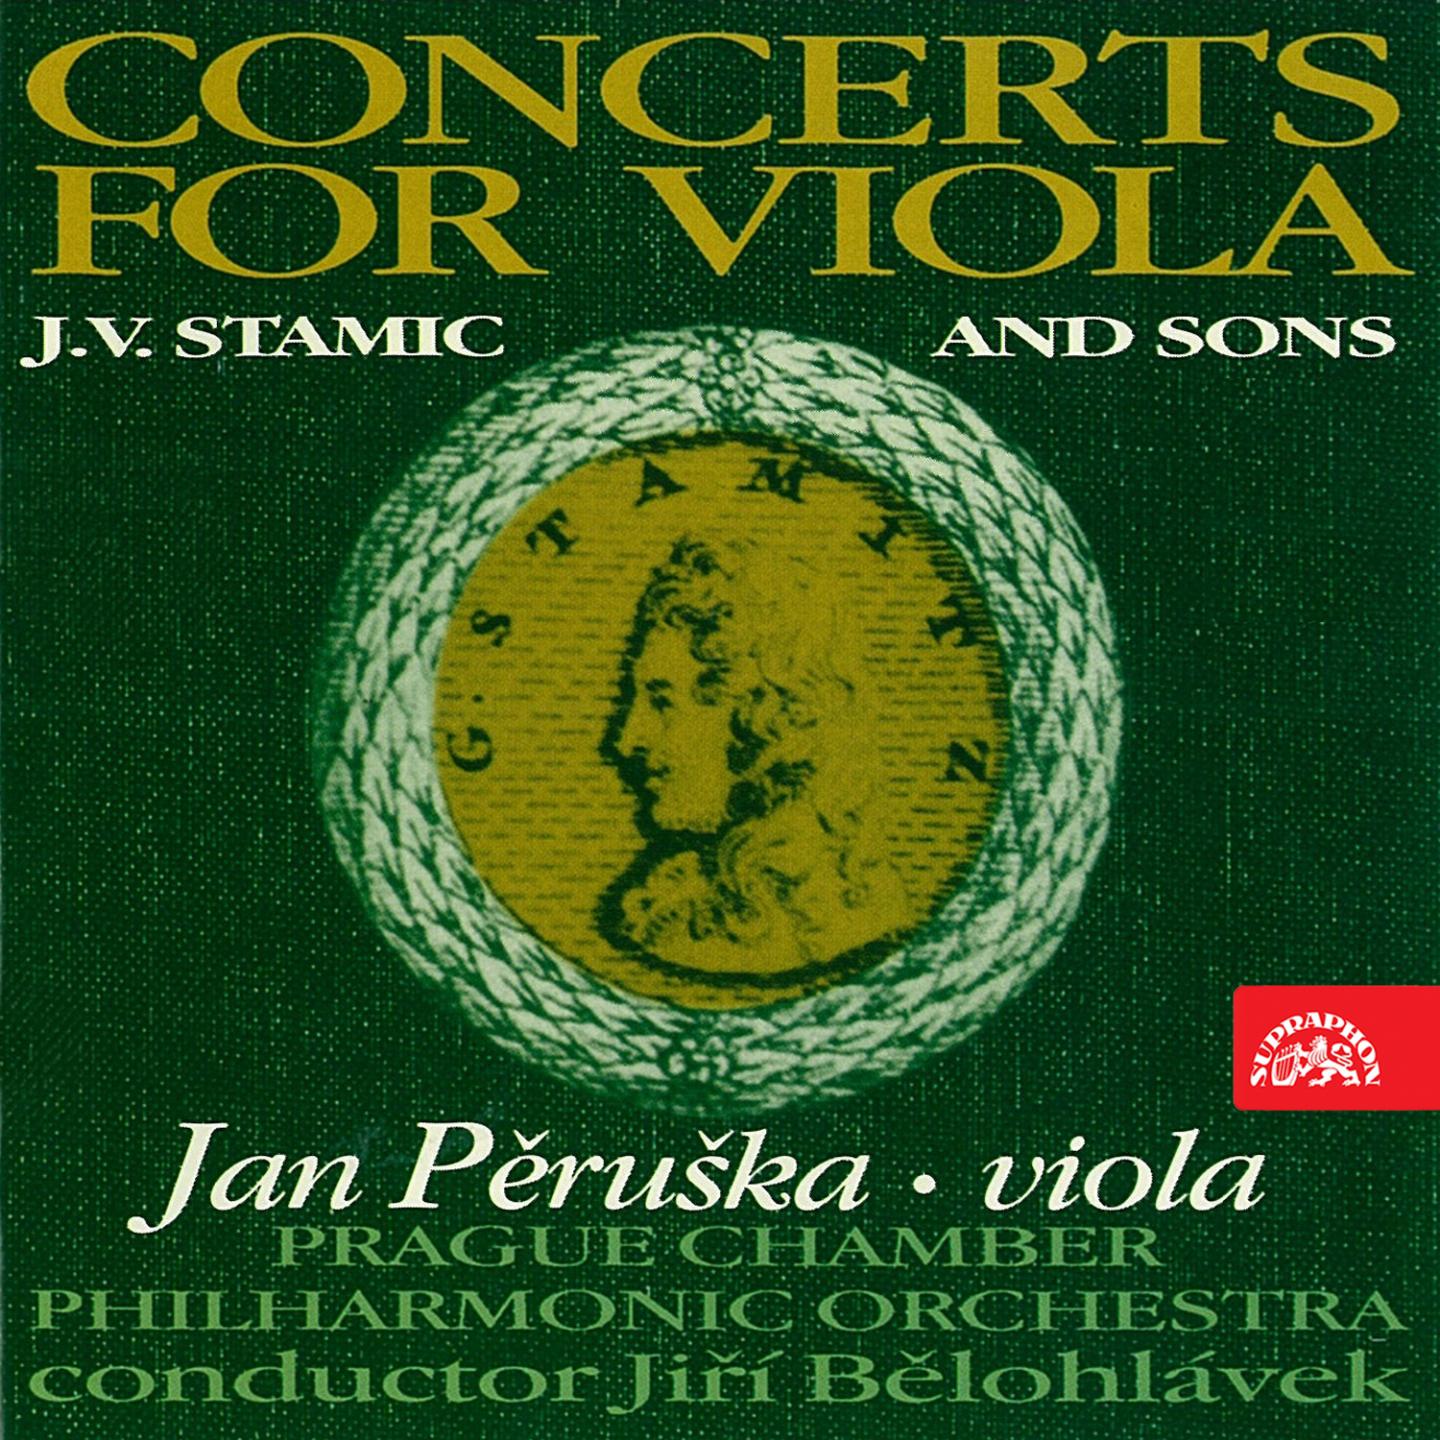 Concerto for Viola and Orchestra in B-Flat Major: III. Rondo